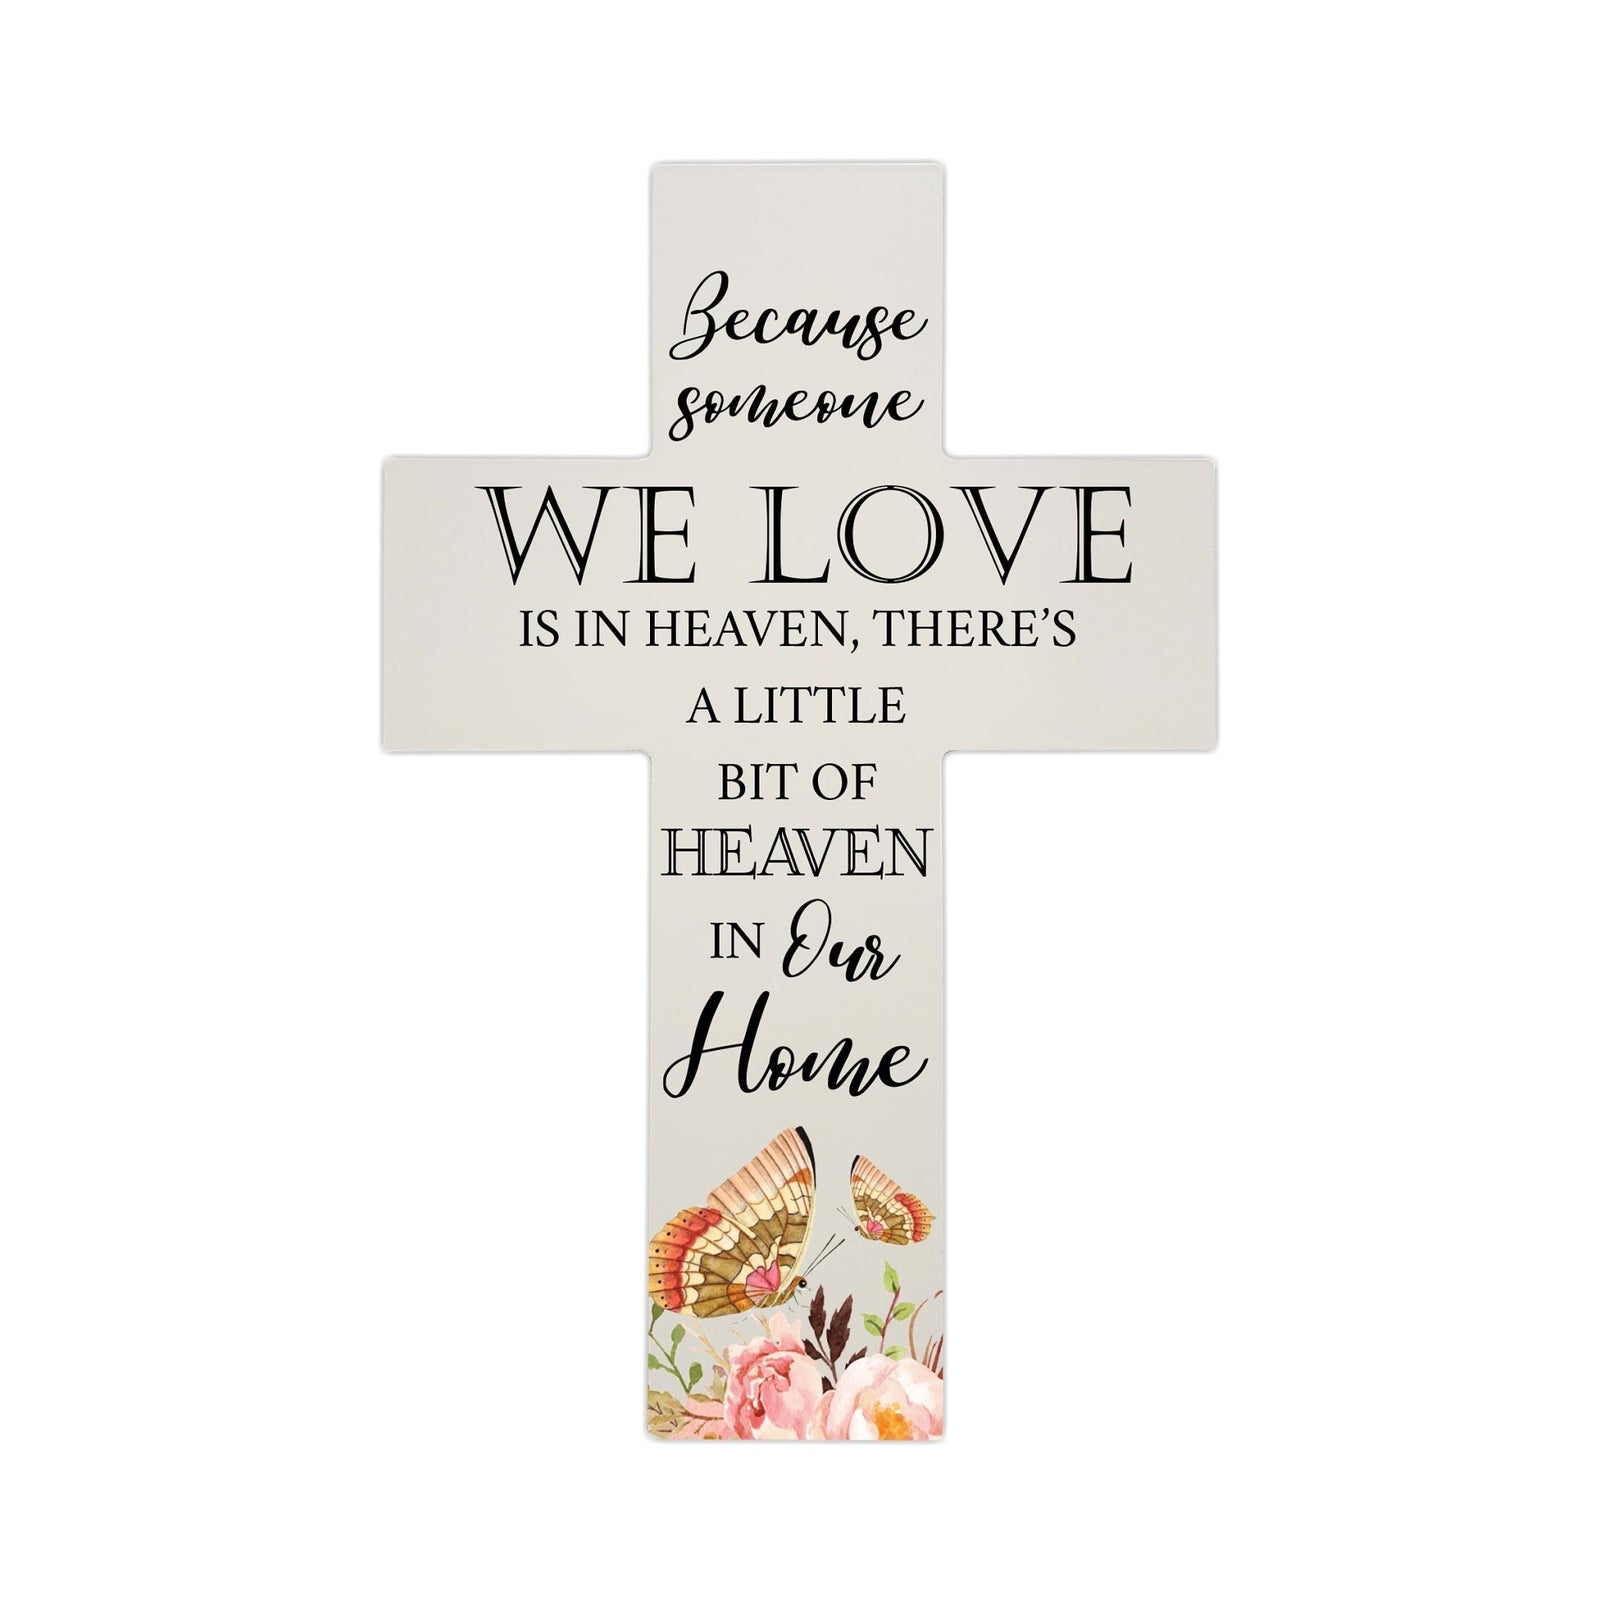 Butterfly Memorial Wall Cross For Loss of Loved One Because Someone We Love is in Heaven Quote Bereavement Keepsake 14 x 9.25 Because Someone We Love is in Heaven, There's A Little Bit Of Heaven In Our Home - LifeSong Milestones